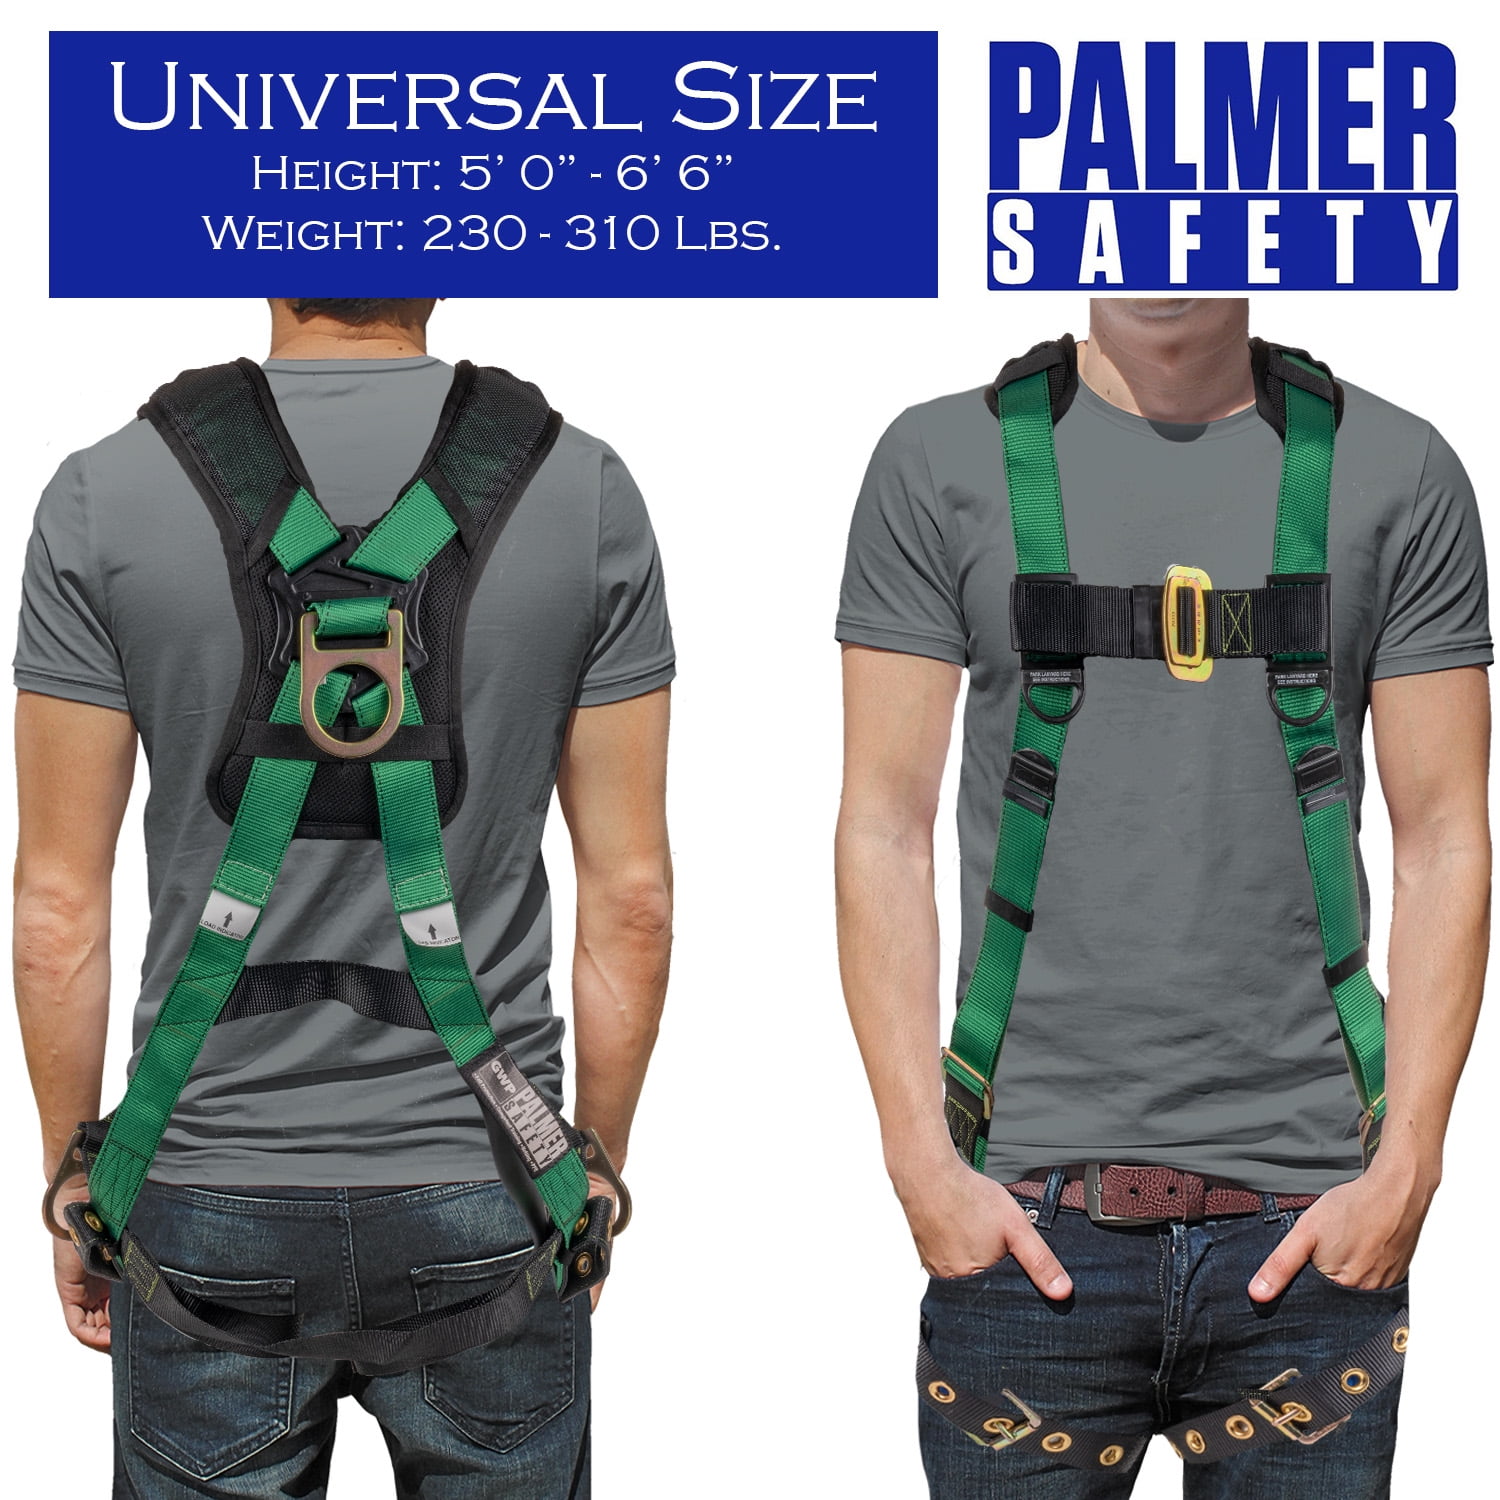 Palmer Safety Fall Protection Safety Harness Kit I 5pt Full Body, 6' Double  Lanyard, 18